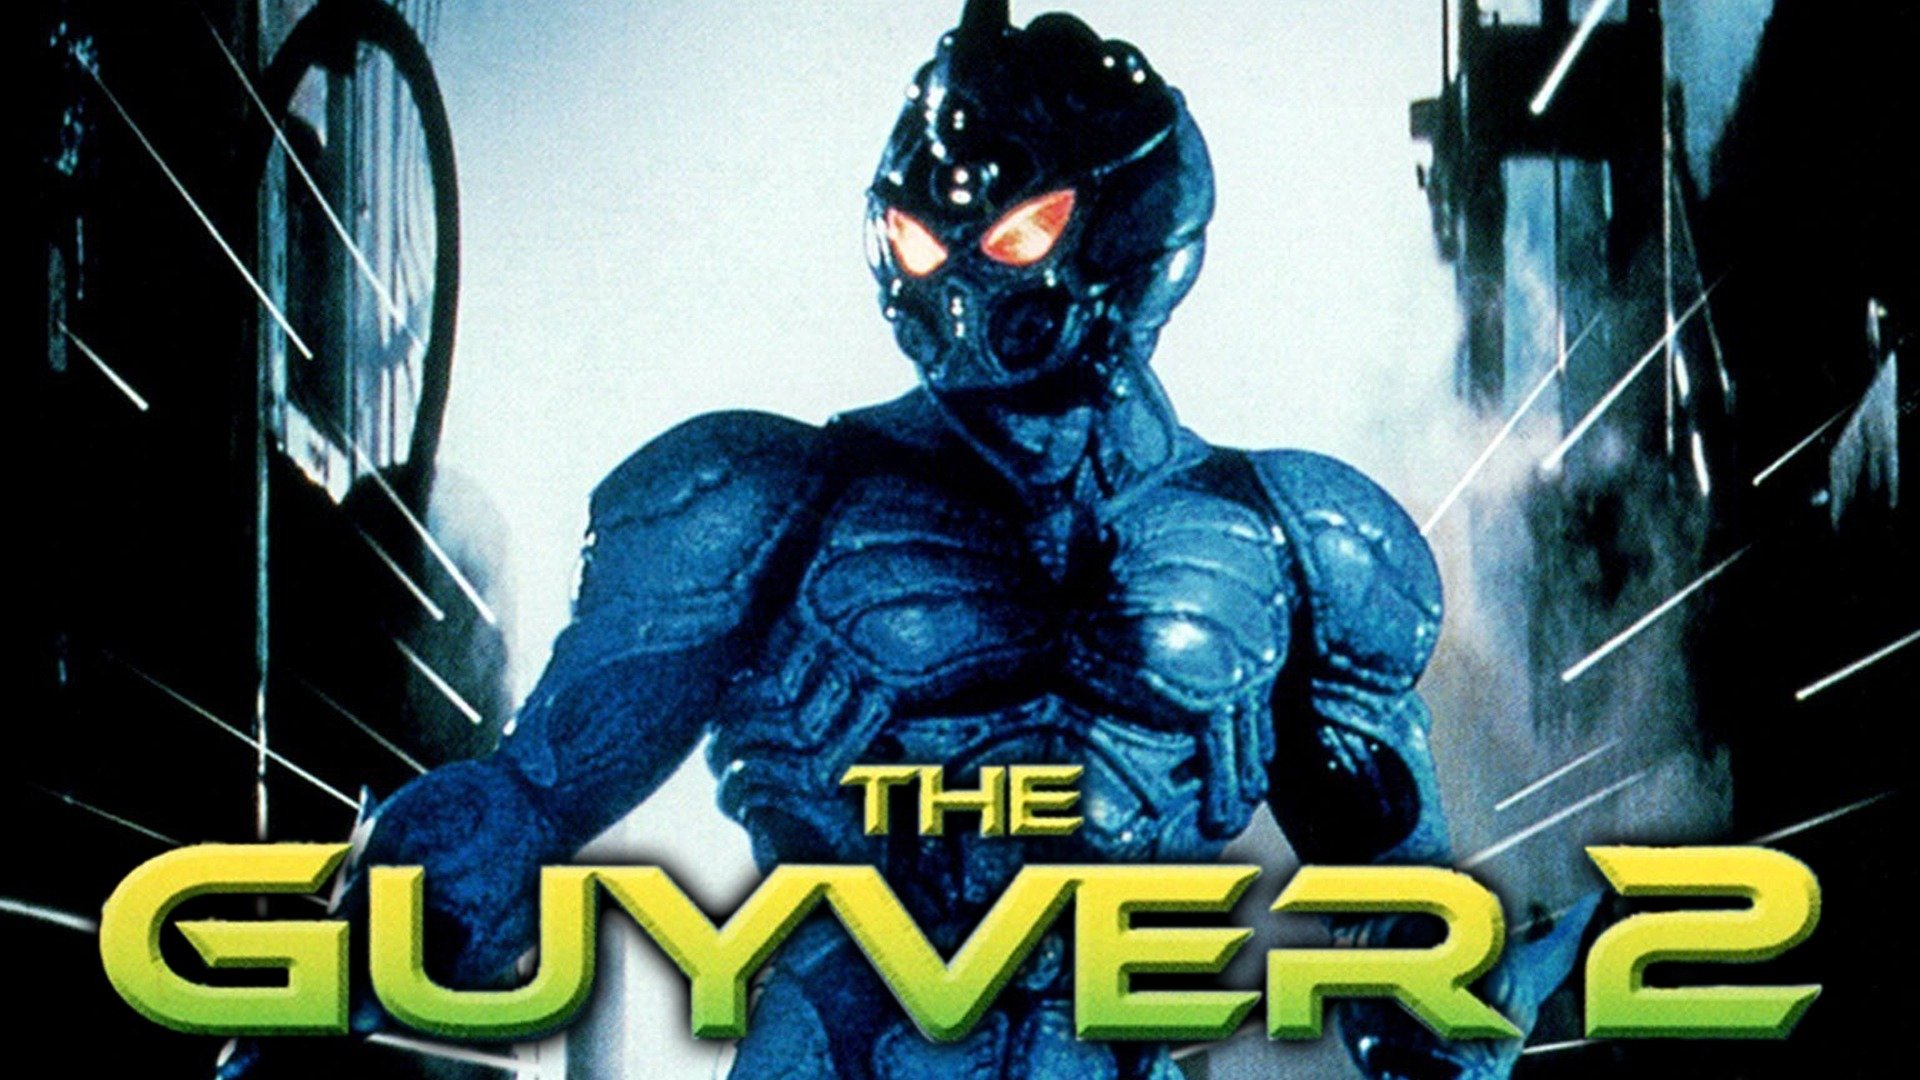 Guyver The Bioboosted Armor: Complete Series Blu-ray